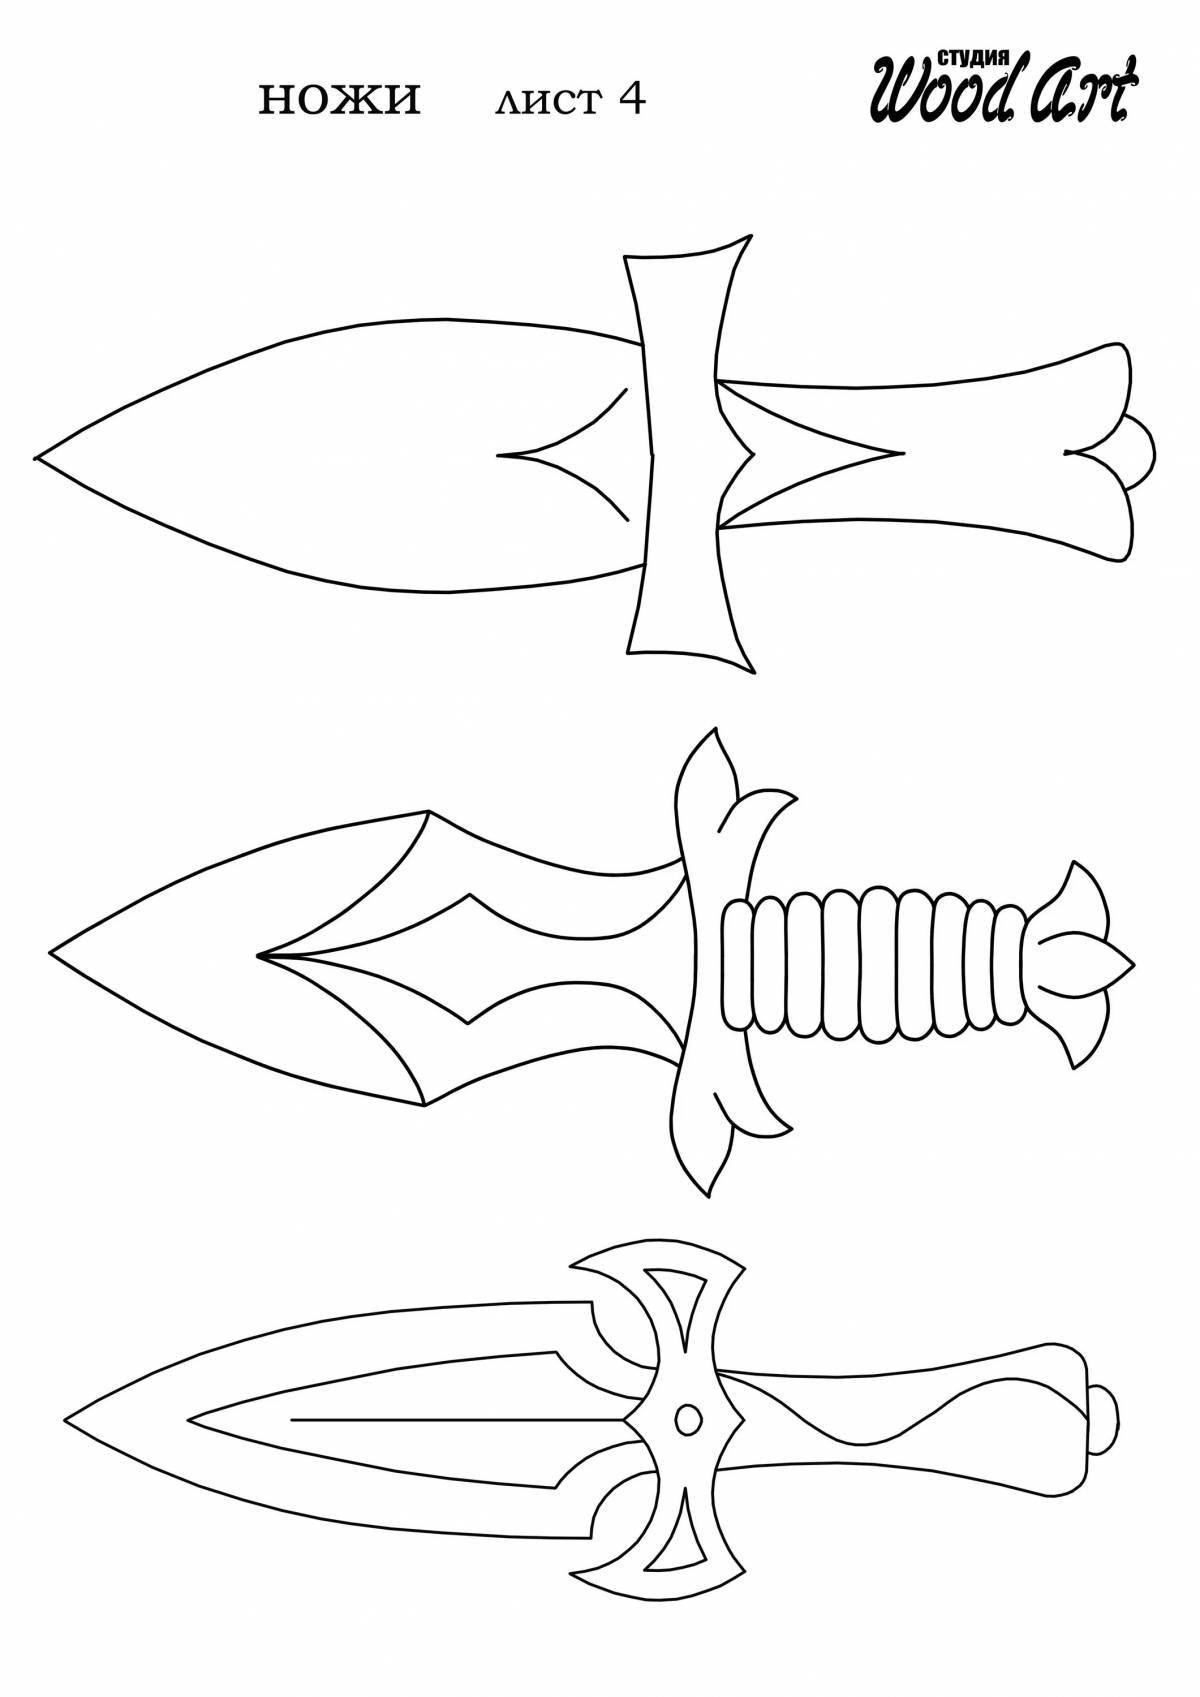 Glowing Poke Knife coloring page